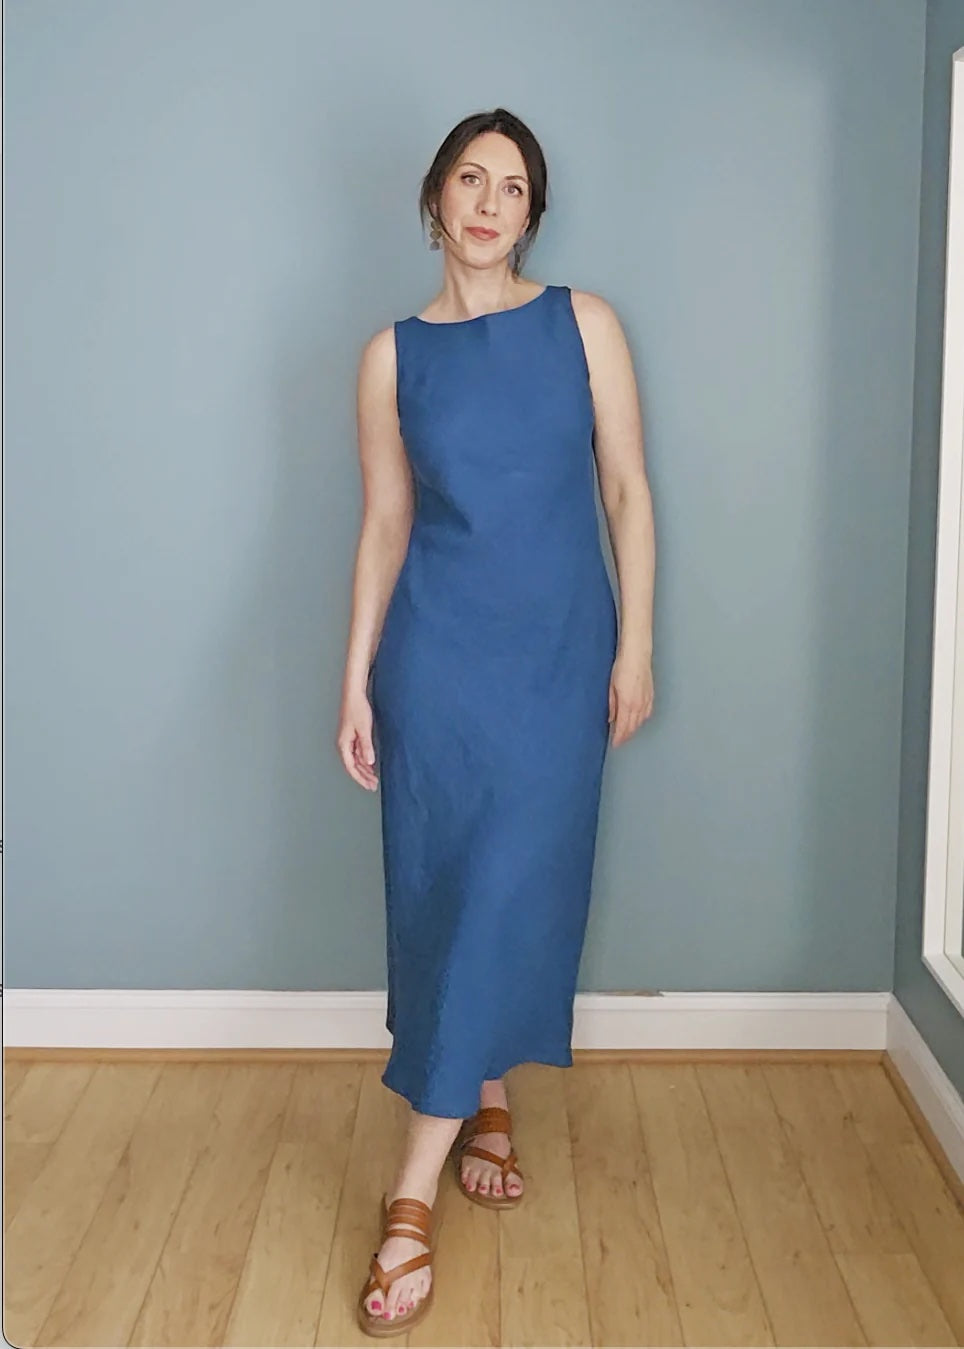 Woman wearing the Ella Dress sewing pattern from Pattern Scout on The Fold Line. A sleeveless shift dress pattern made in rayon, linen, silk, or satin fabric, featuring a boat neckline, bias cut, and midi length.